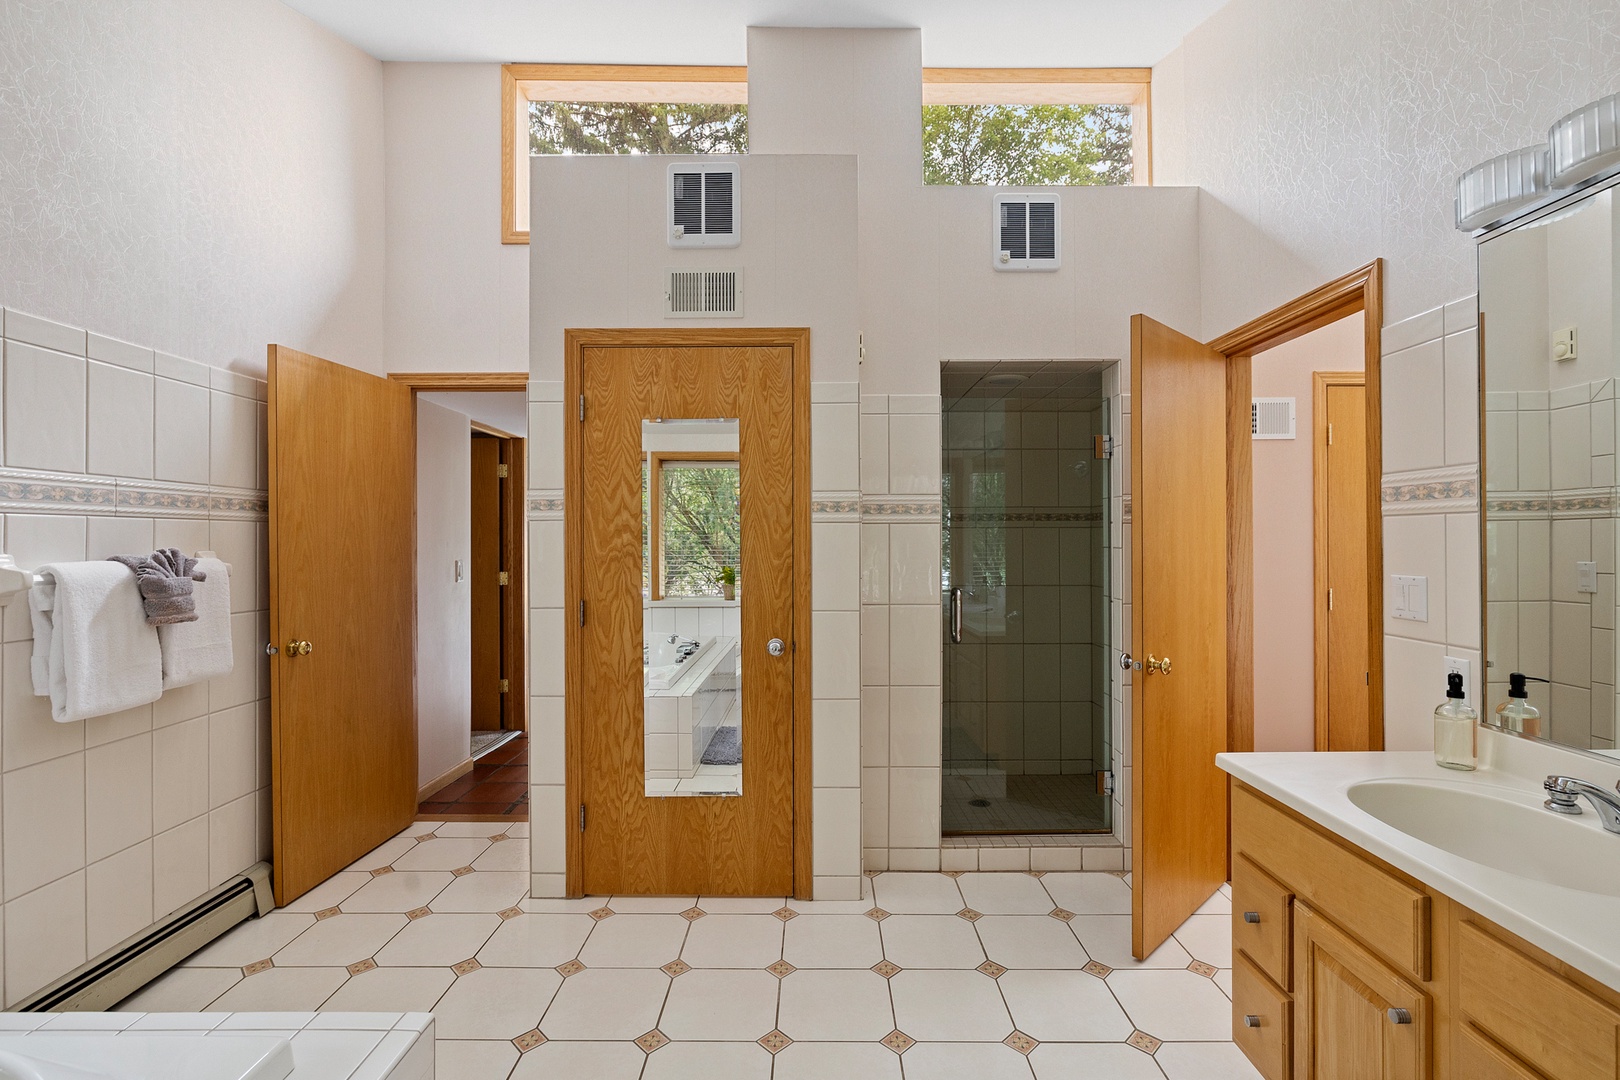 Enjoy a personal spa retreat in the privacy of the primary bathroom.